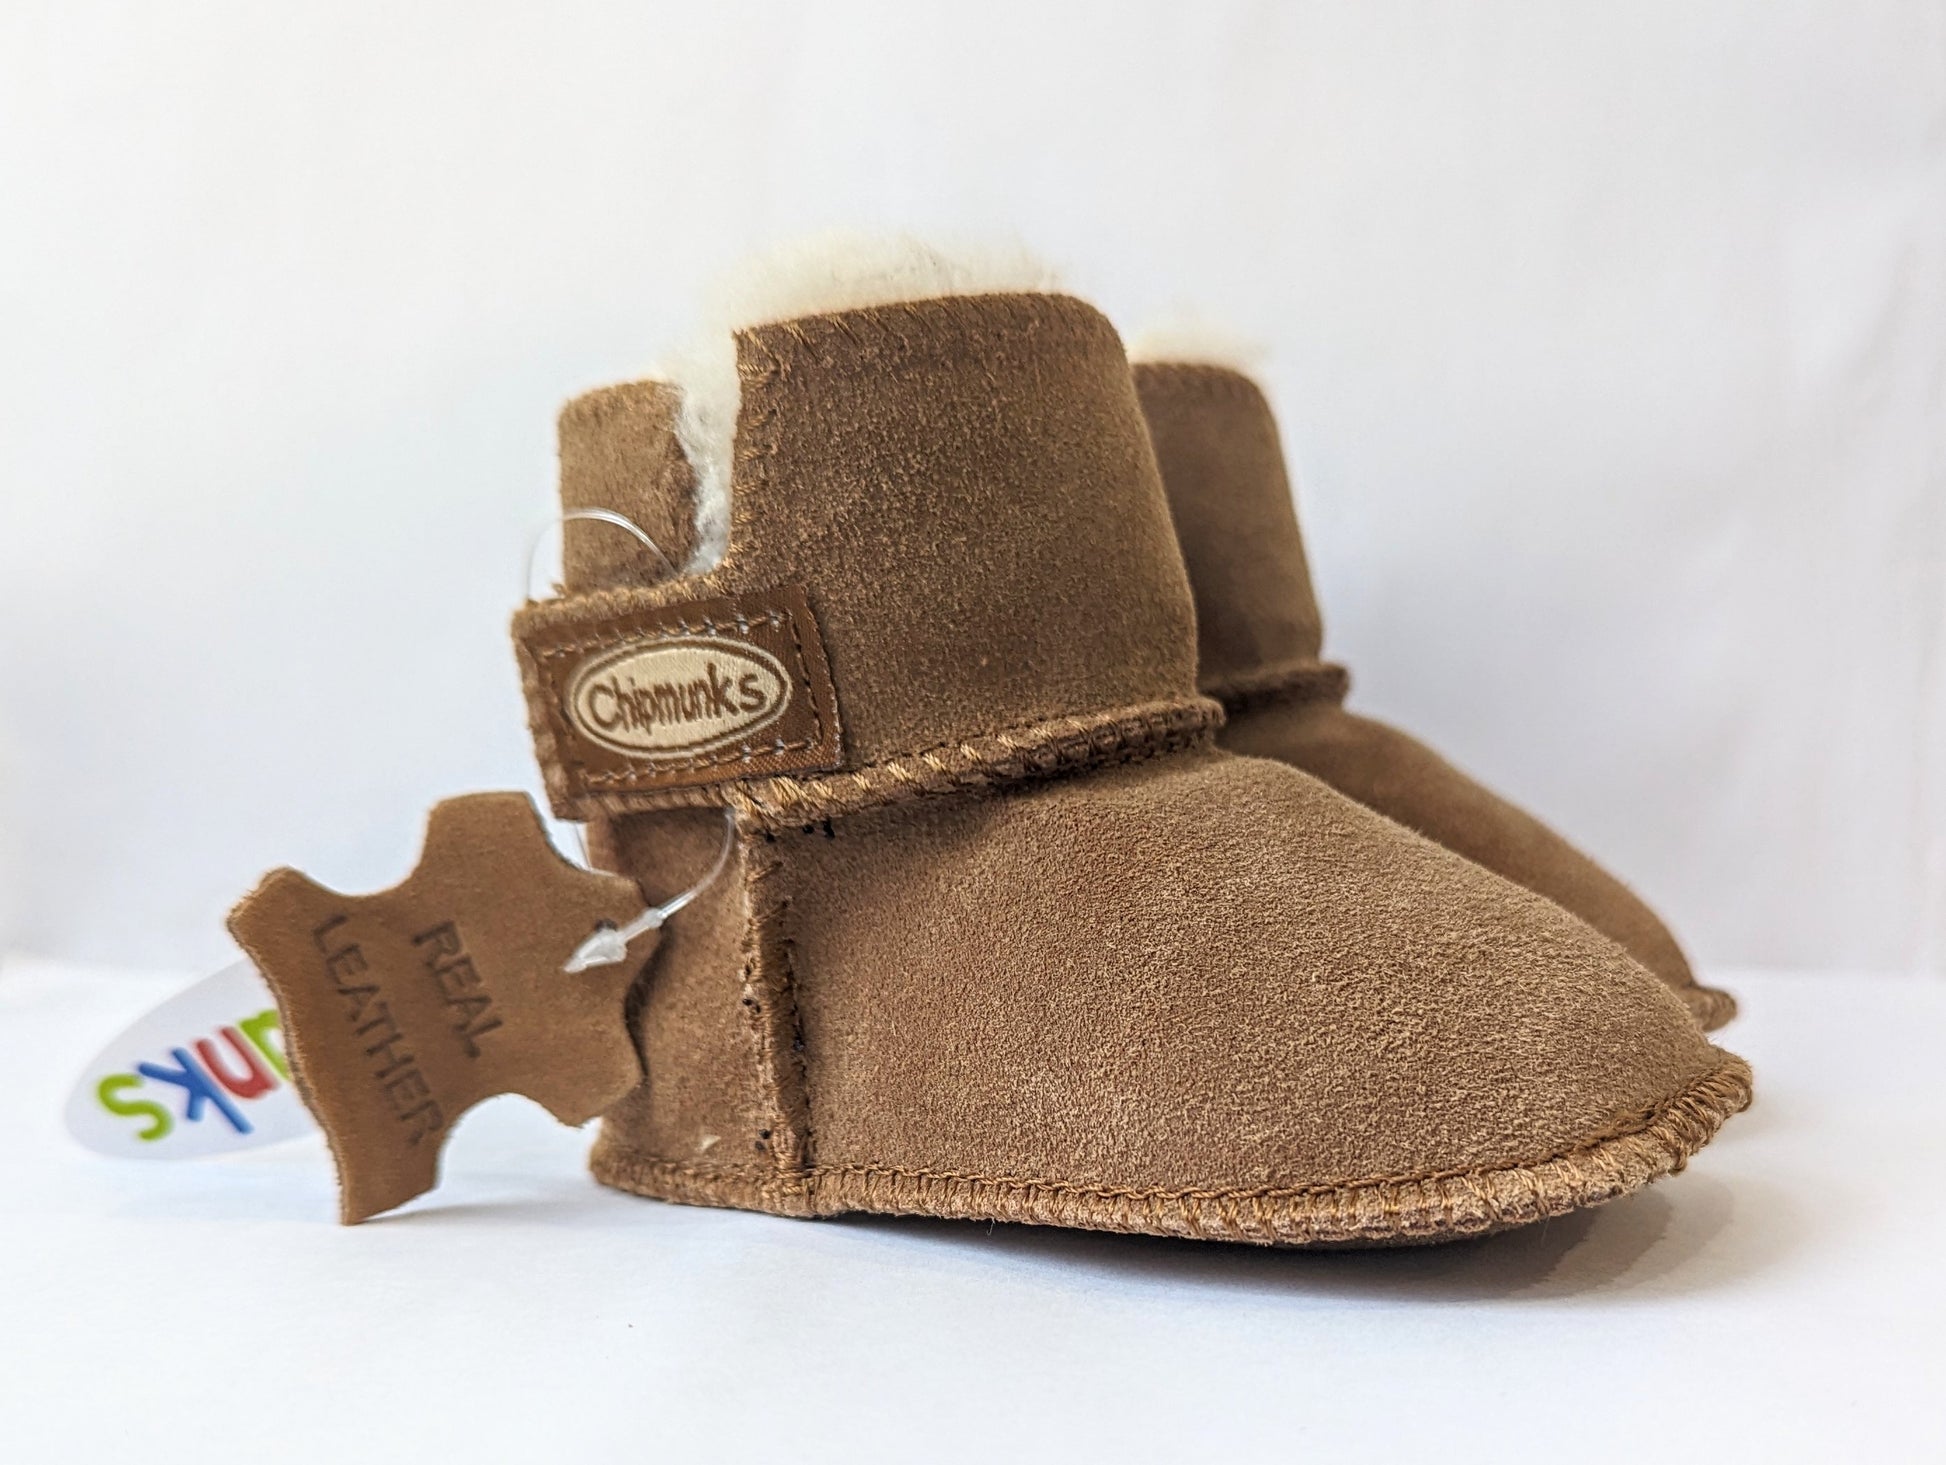 A pair of unisex pull on warm lined slipper boots by Chipmunks, style JoJo, in tan. Right angled view.